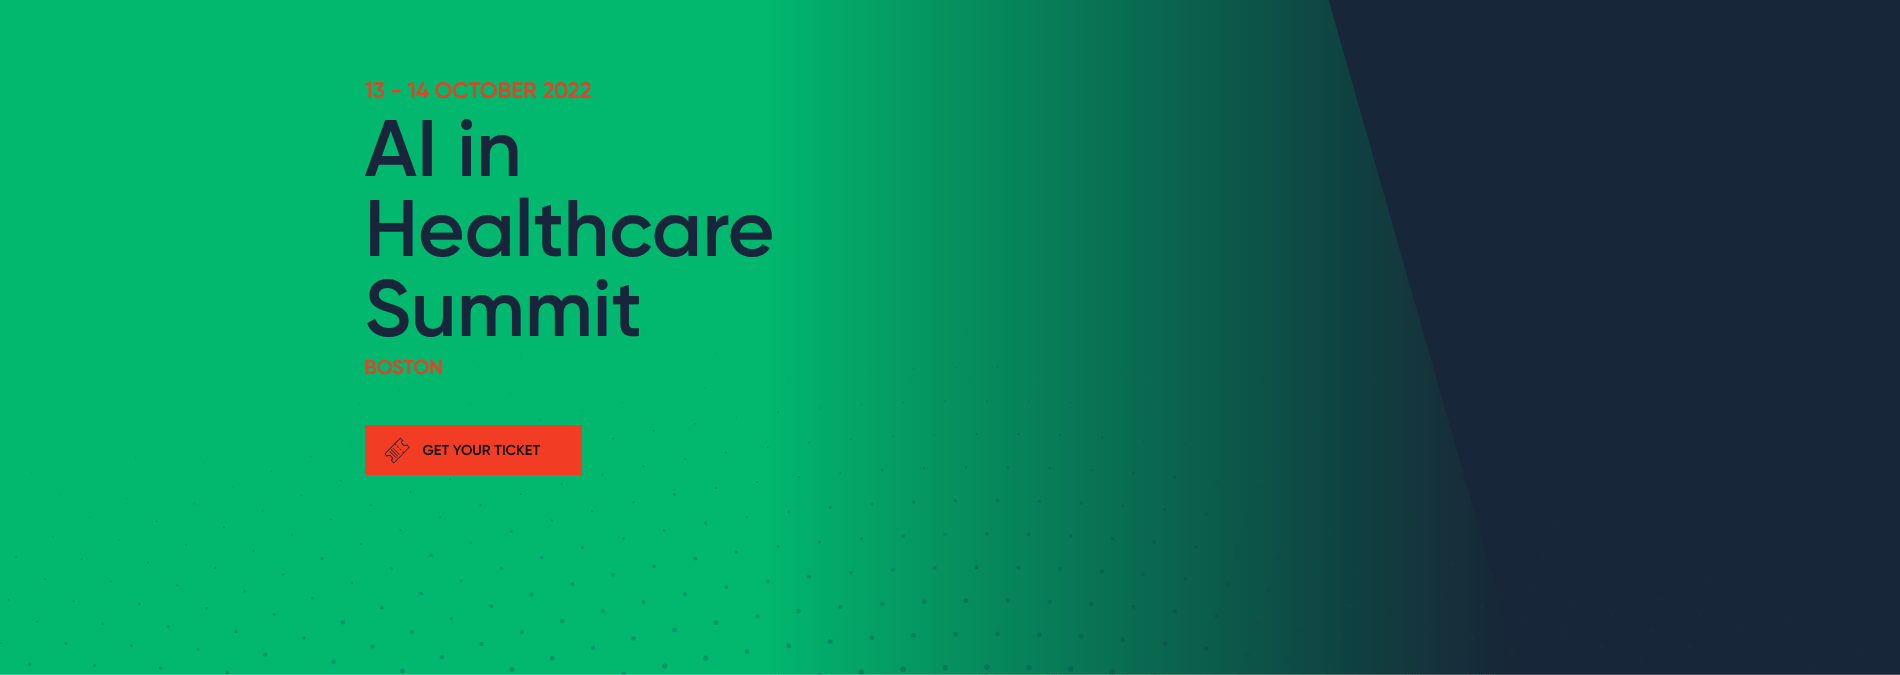 Banner for AI in Healthcare Summit